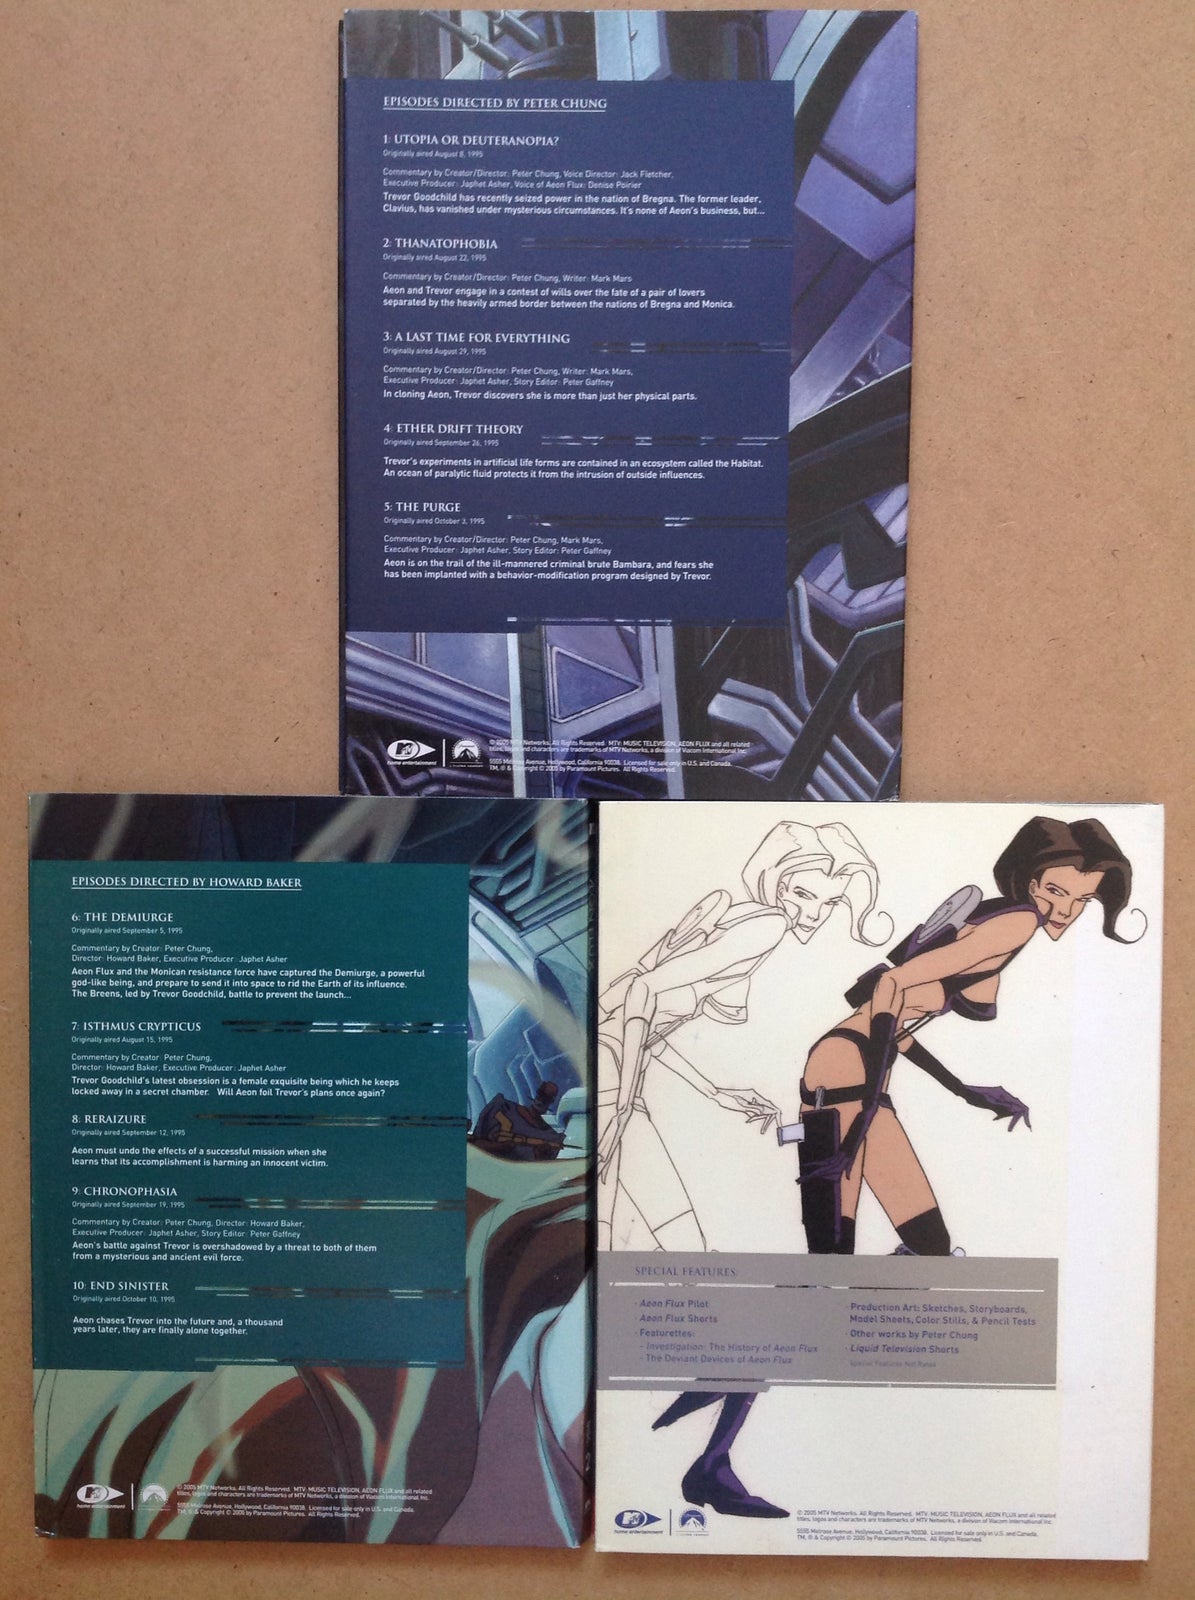 Æon Flux - The complete animated series box-set, DVD,